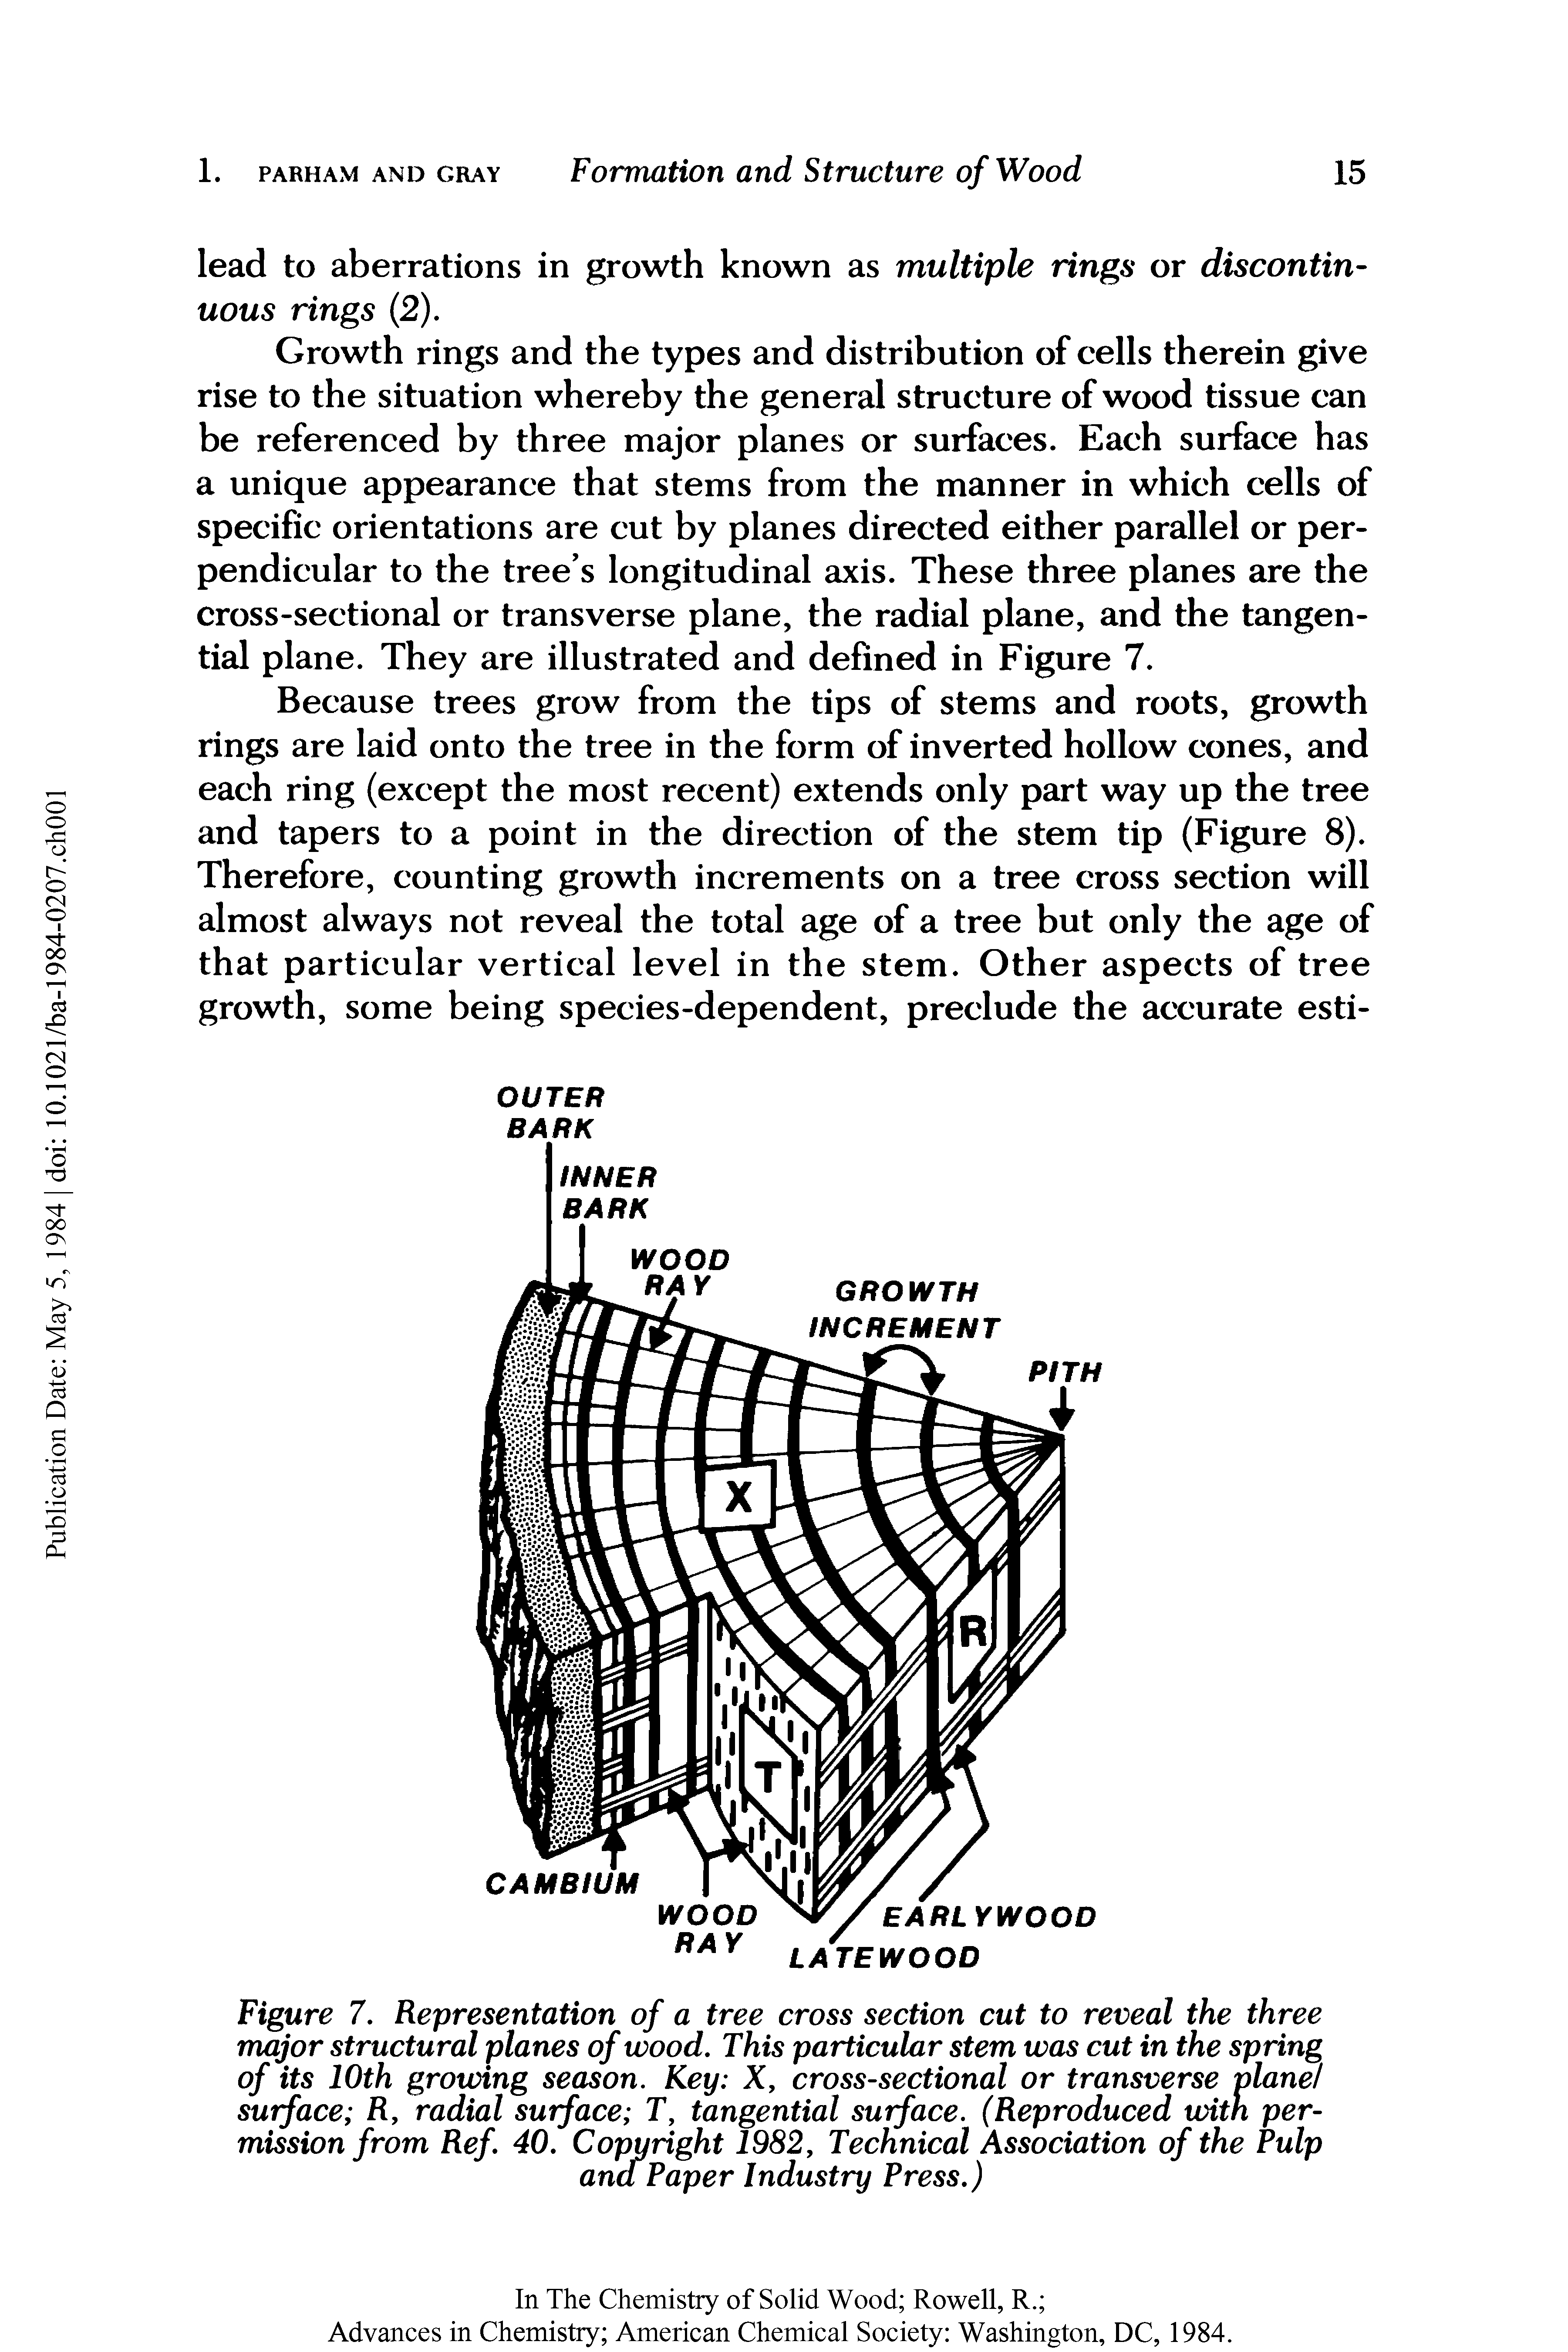 Figure 7. Representation of a tree cross section cut to reveal the three major structural planes of wood. This particular stem was cut in the spring of its 10th growing season. Key X, cross-sectional or transverse plane surface R, radial surface T, tangential surface. (Reproduced with permission from Ref 40. Copyright 1982, Technical Association of the Pulp ana Paper Industry Press.)...